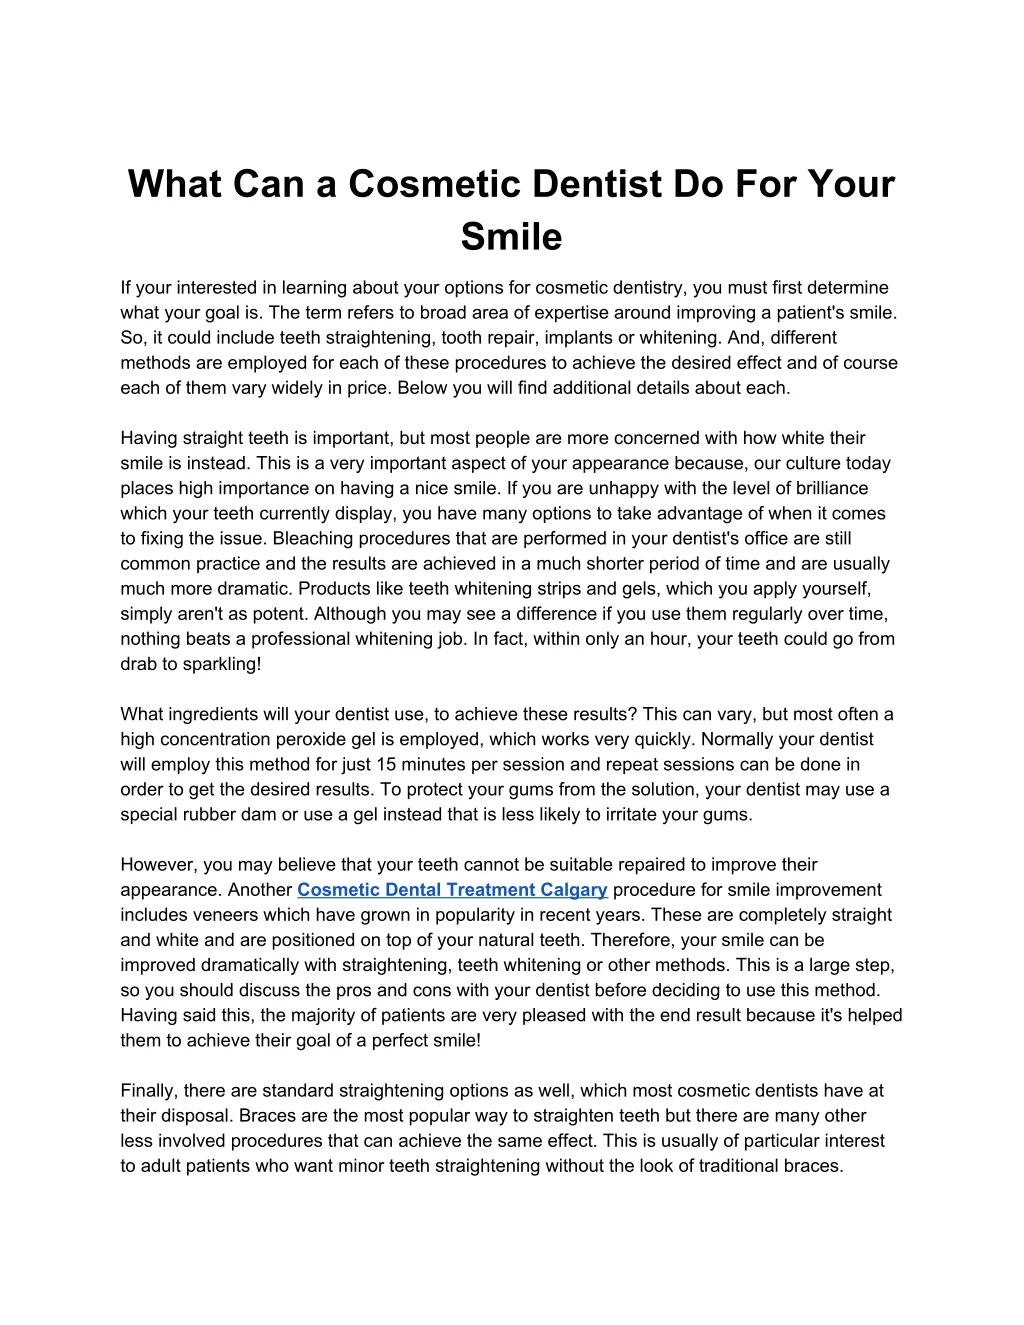 what can a cosmetic dentist do for your smile